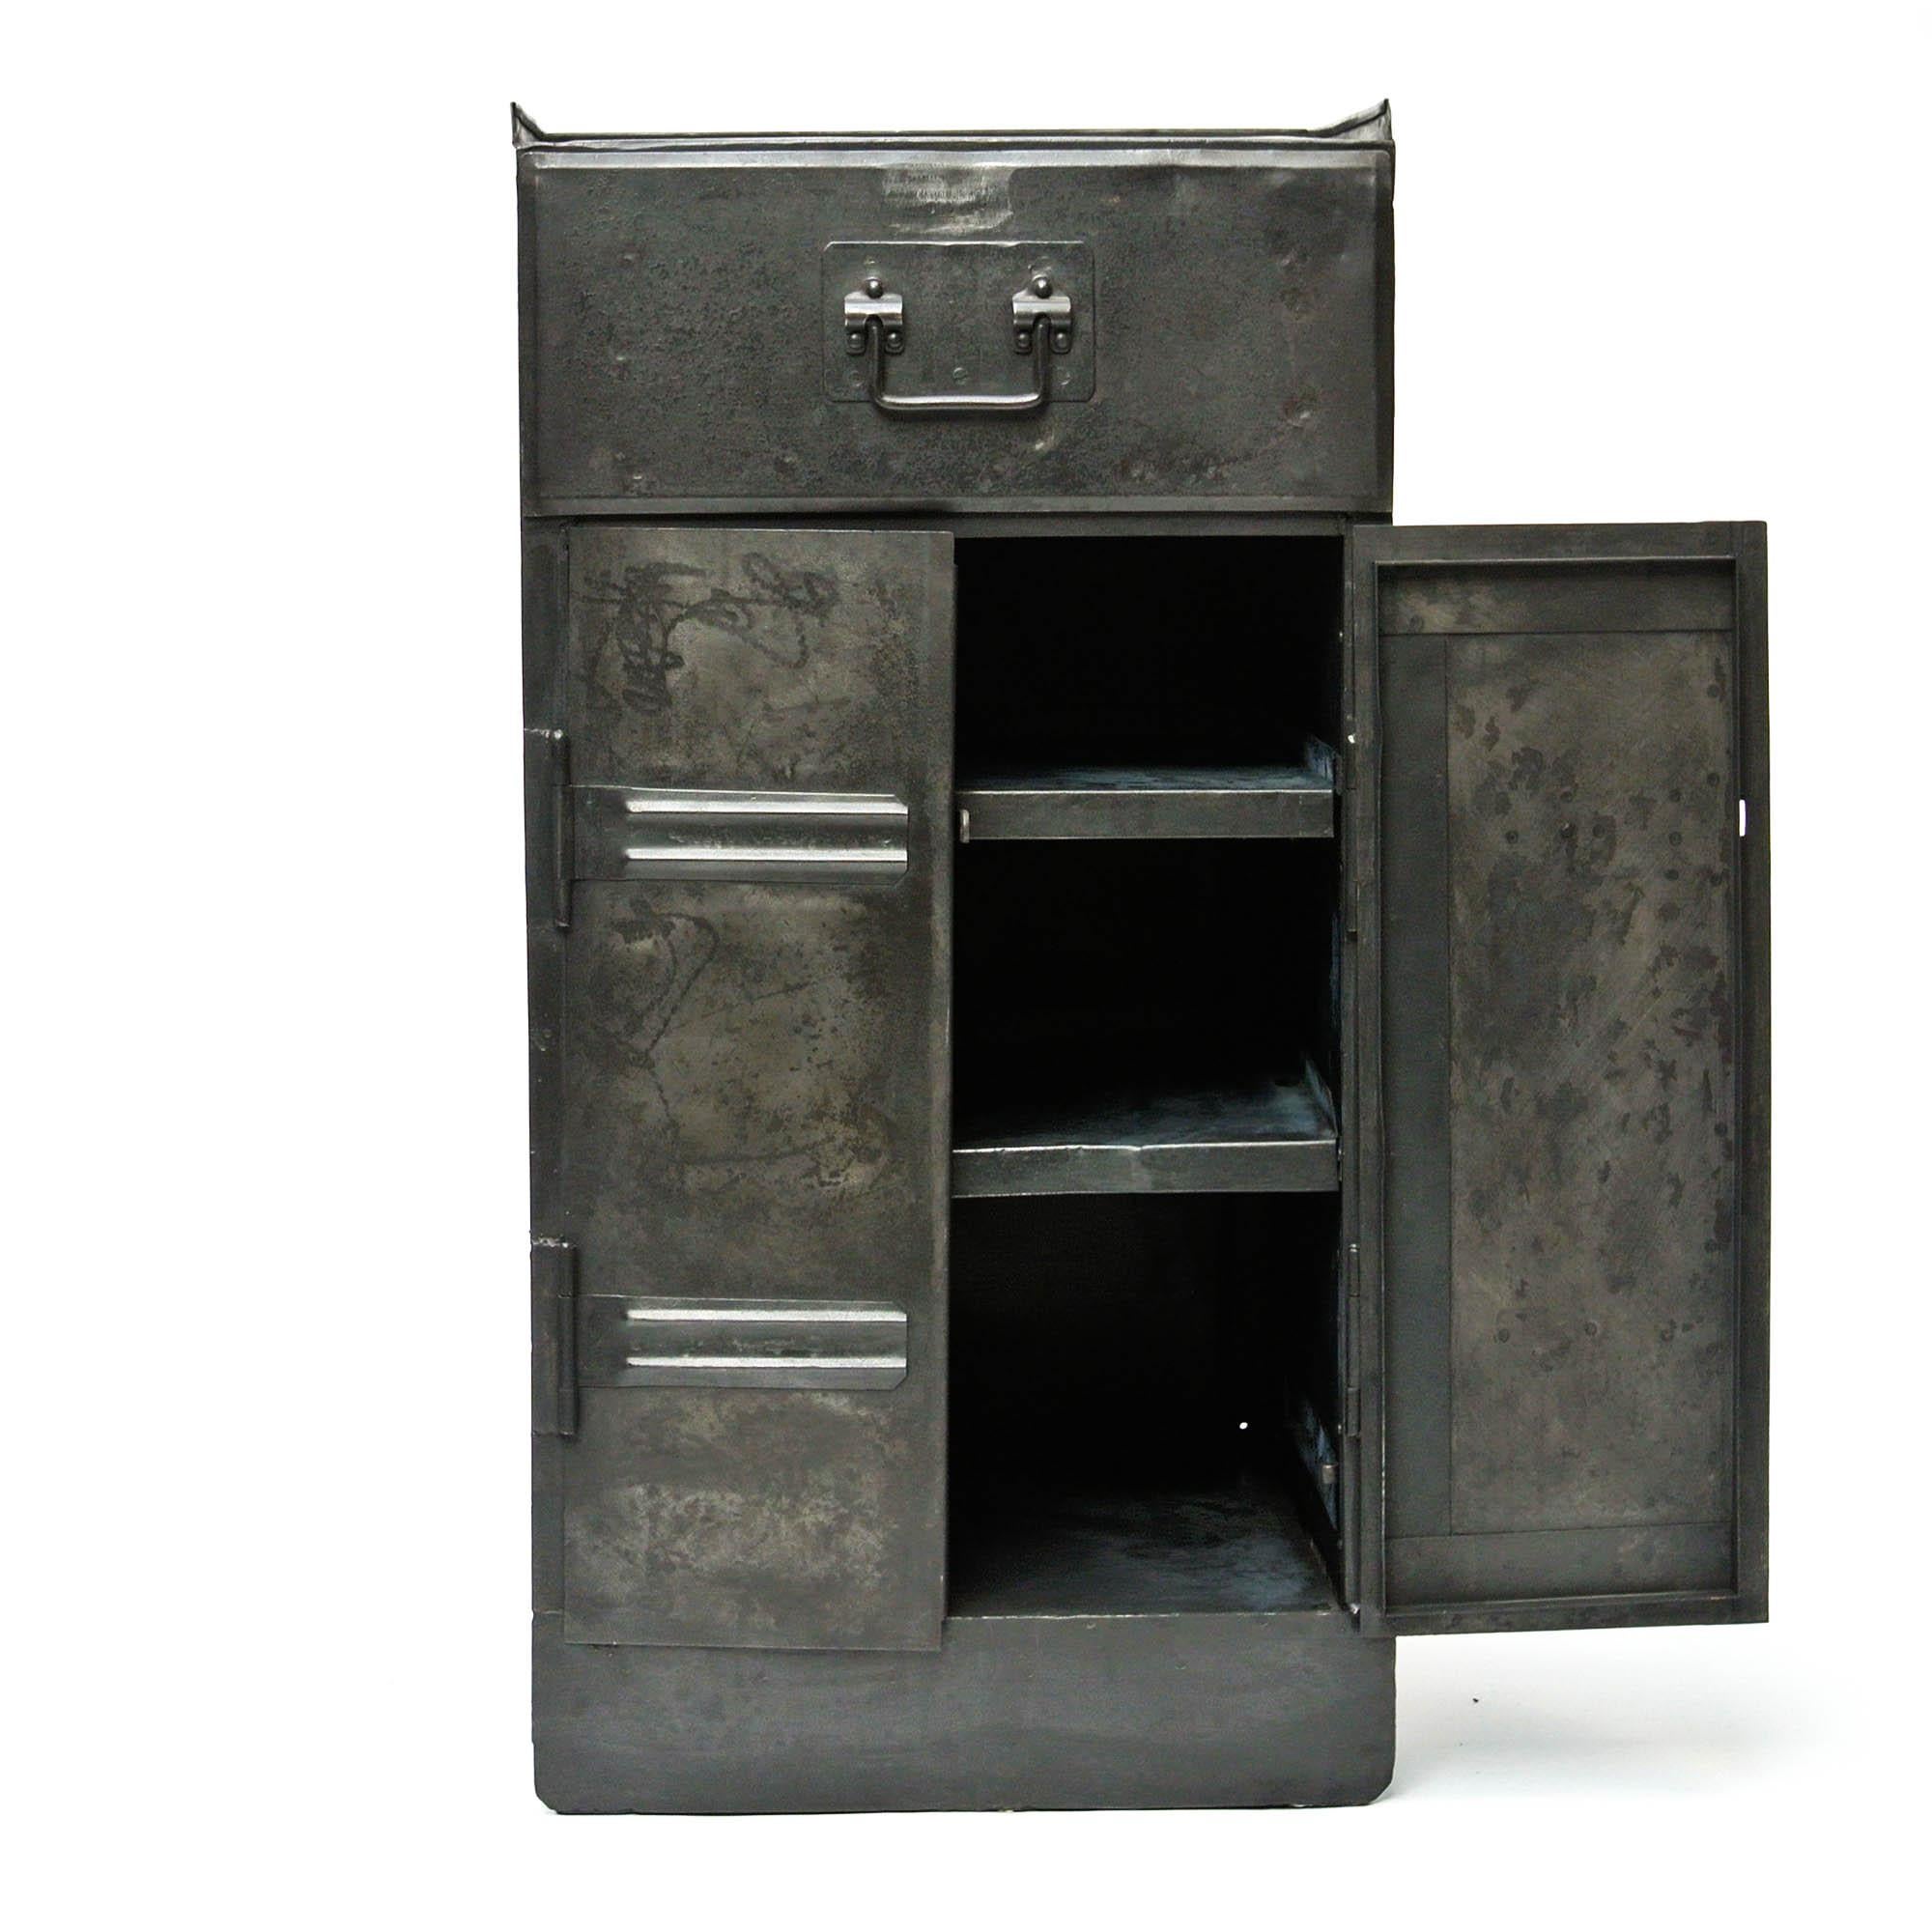 Old American Cabinet in Riveted Steel, 1942, US (amerikanisch)